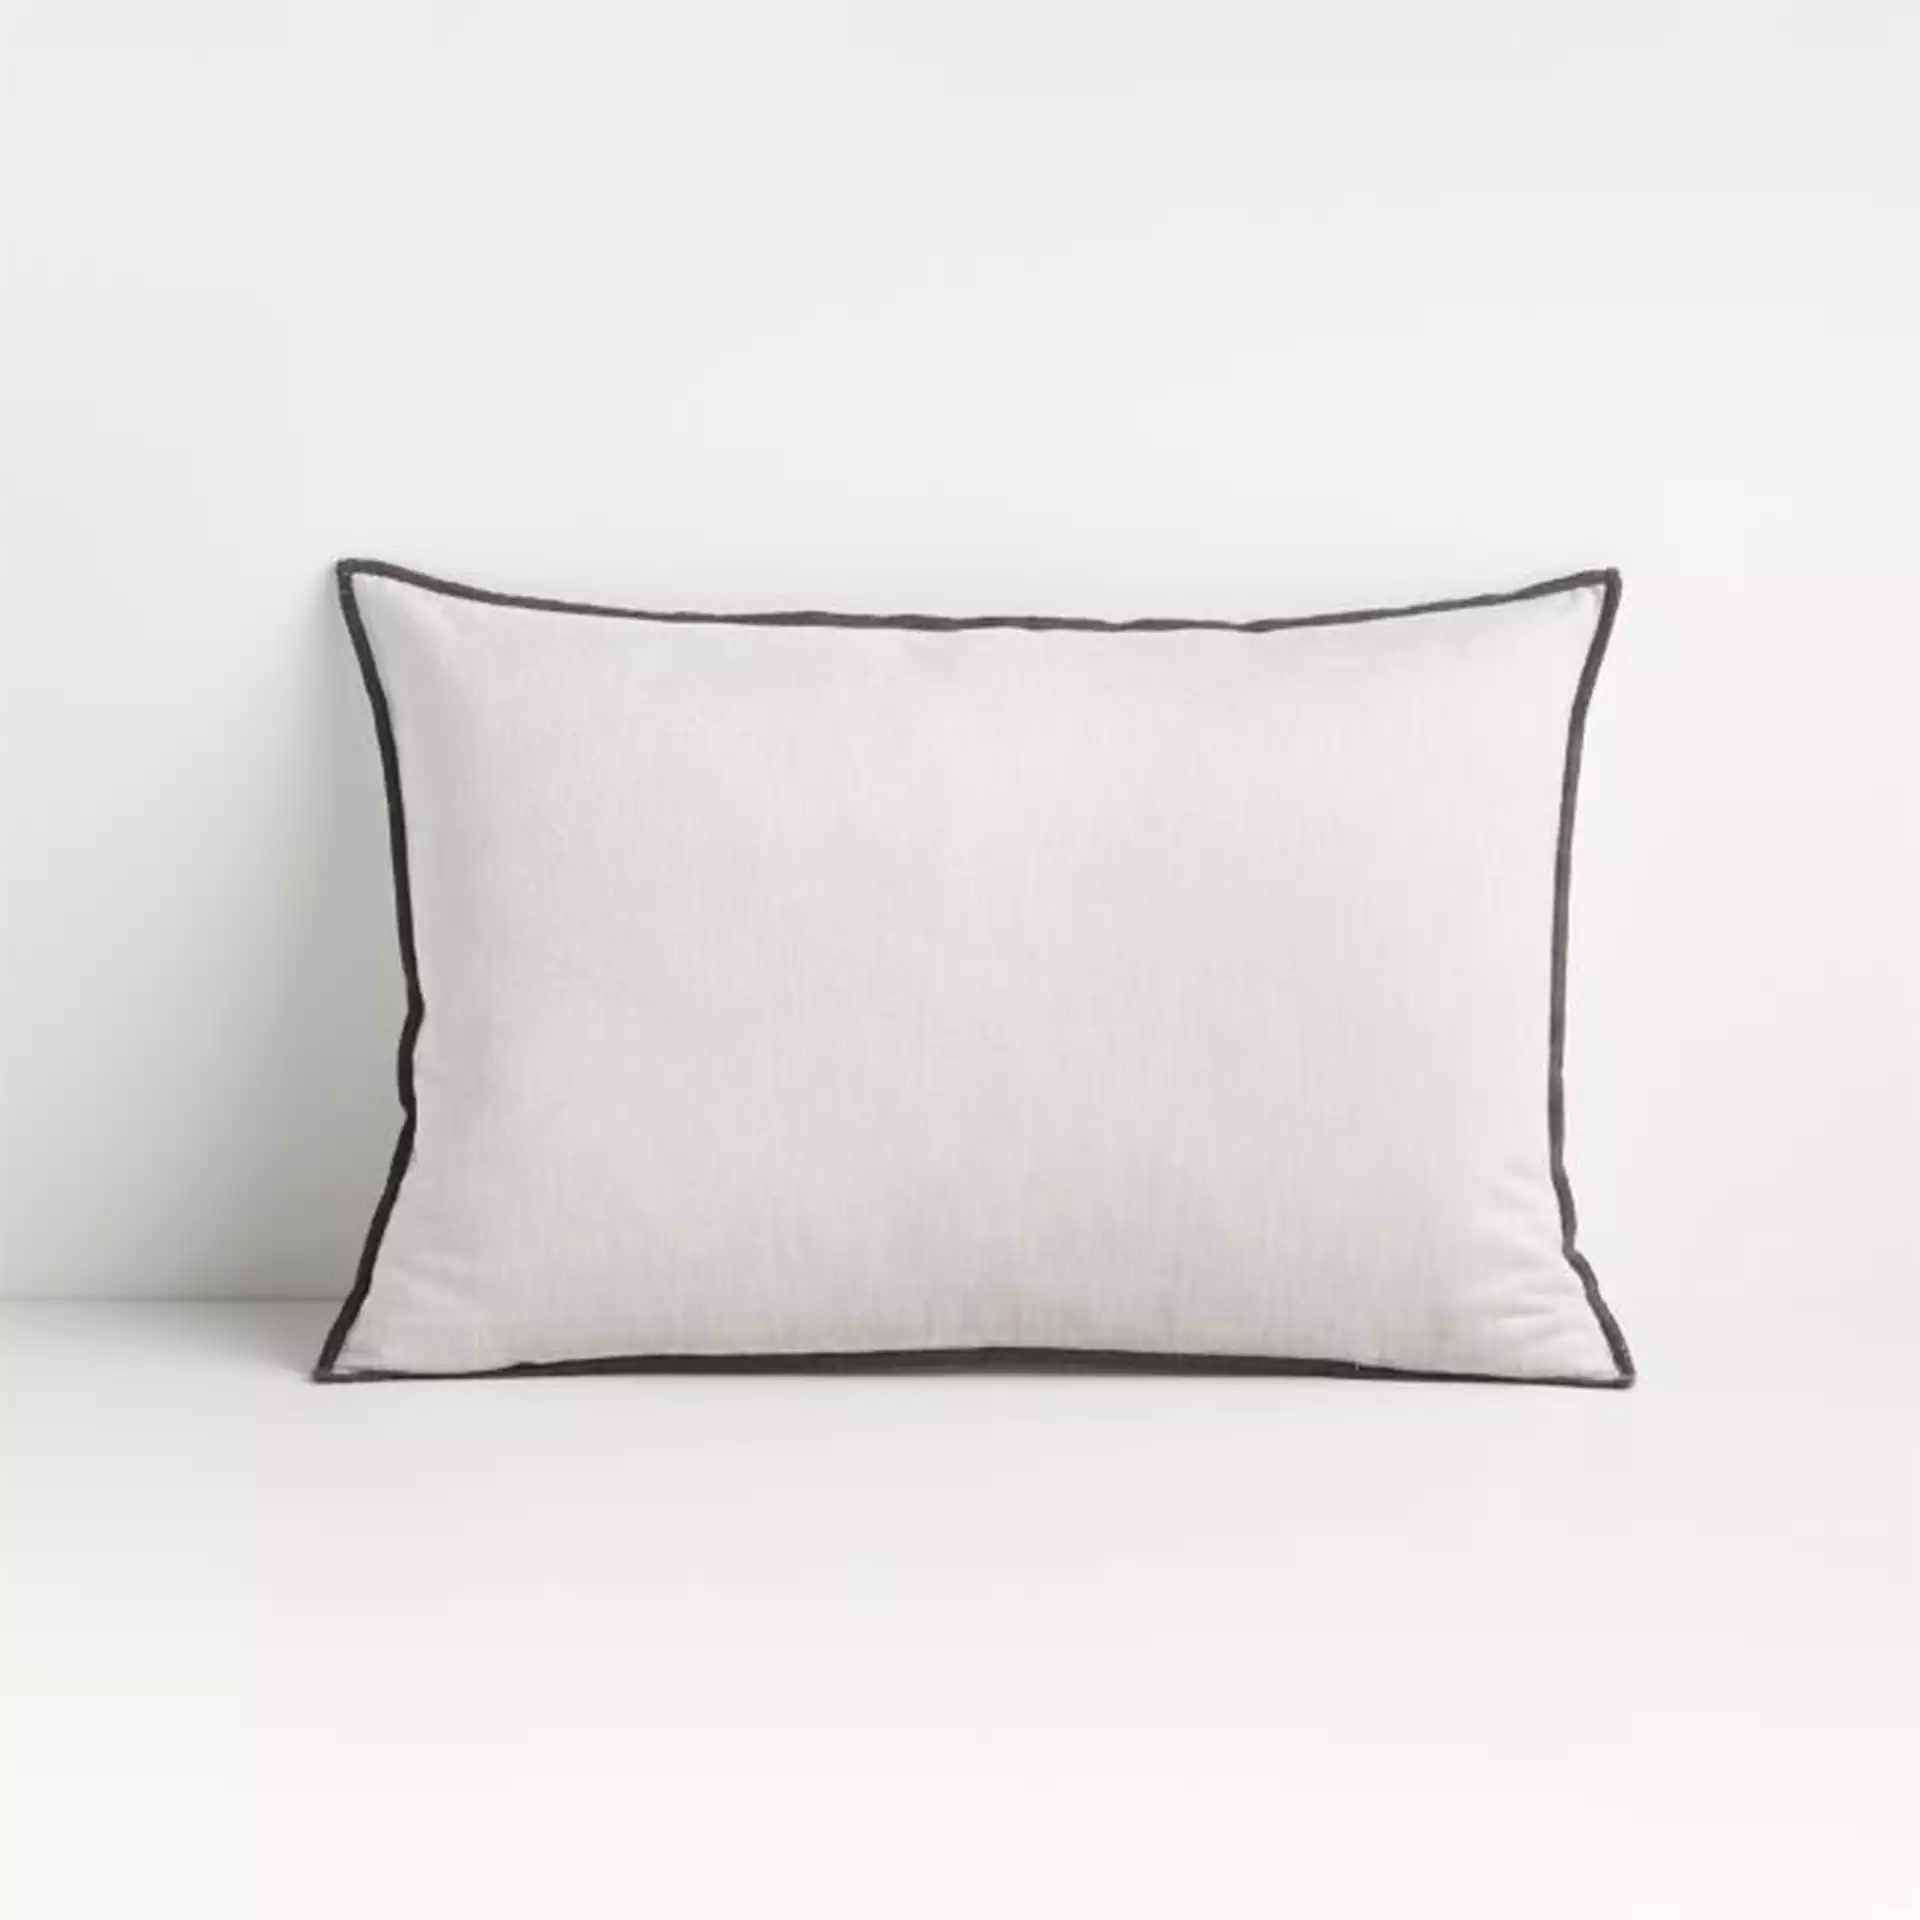 Styria Moonbeam 22"x15" Pillow with Feather-Down Insert